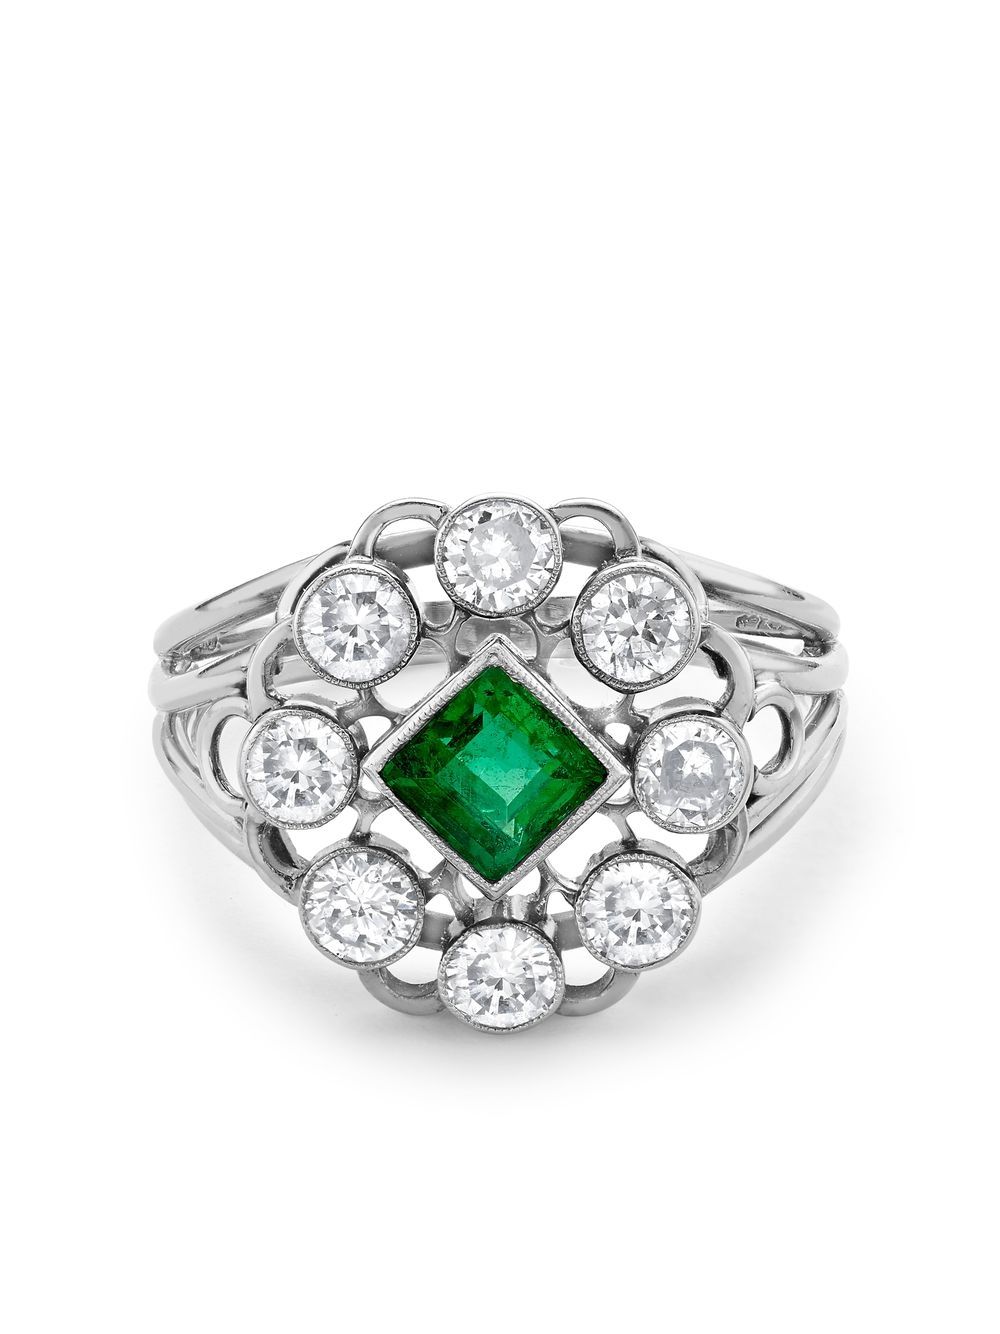 Edwardian pre-owned emerald and diamond ring